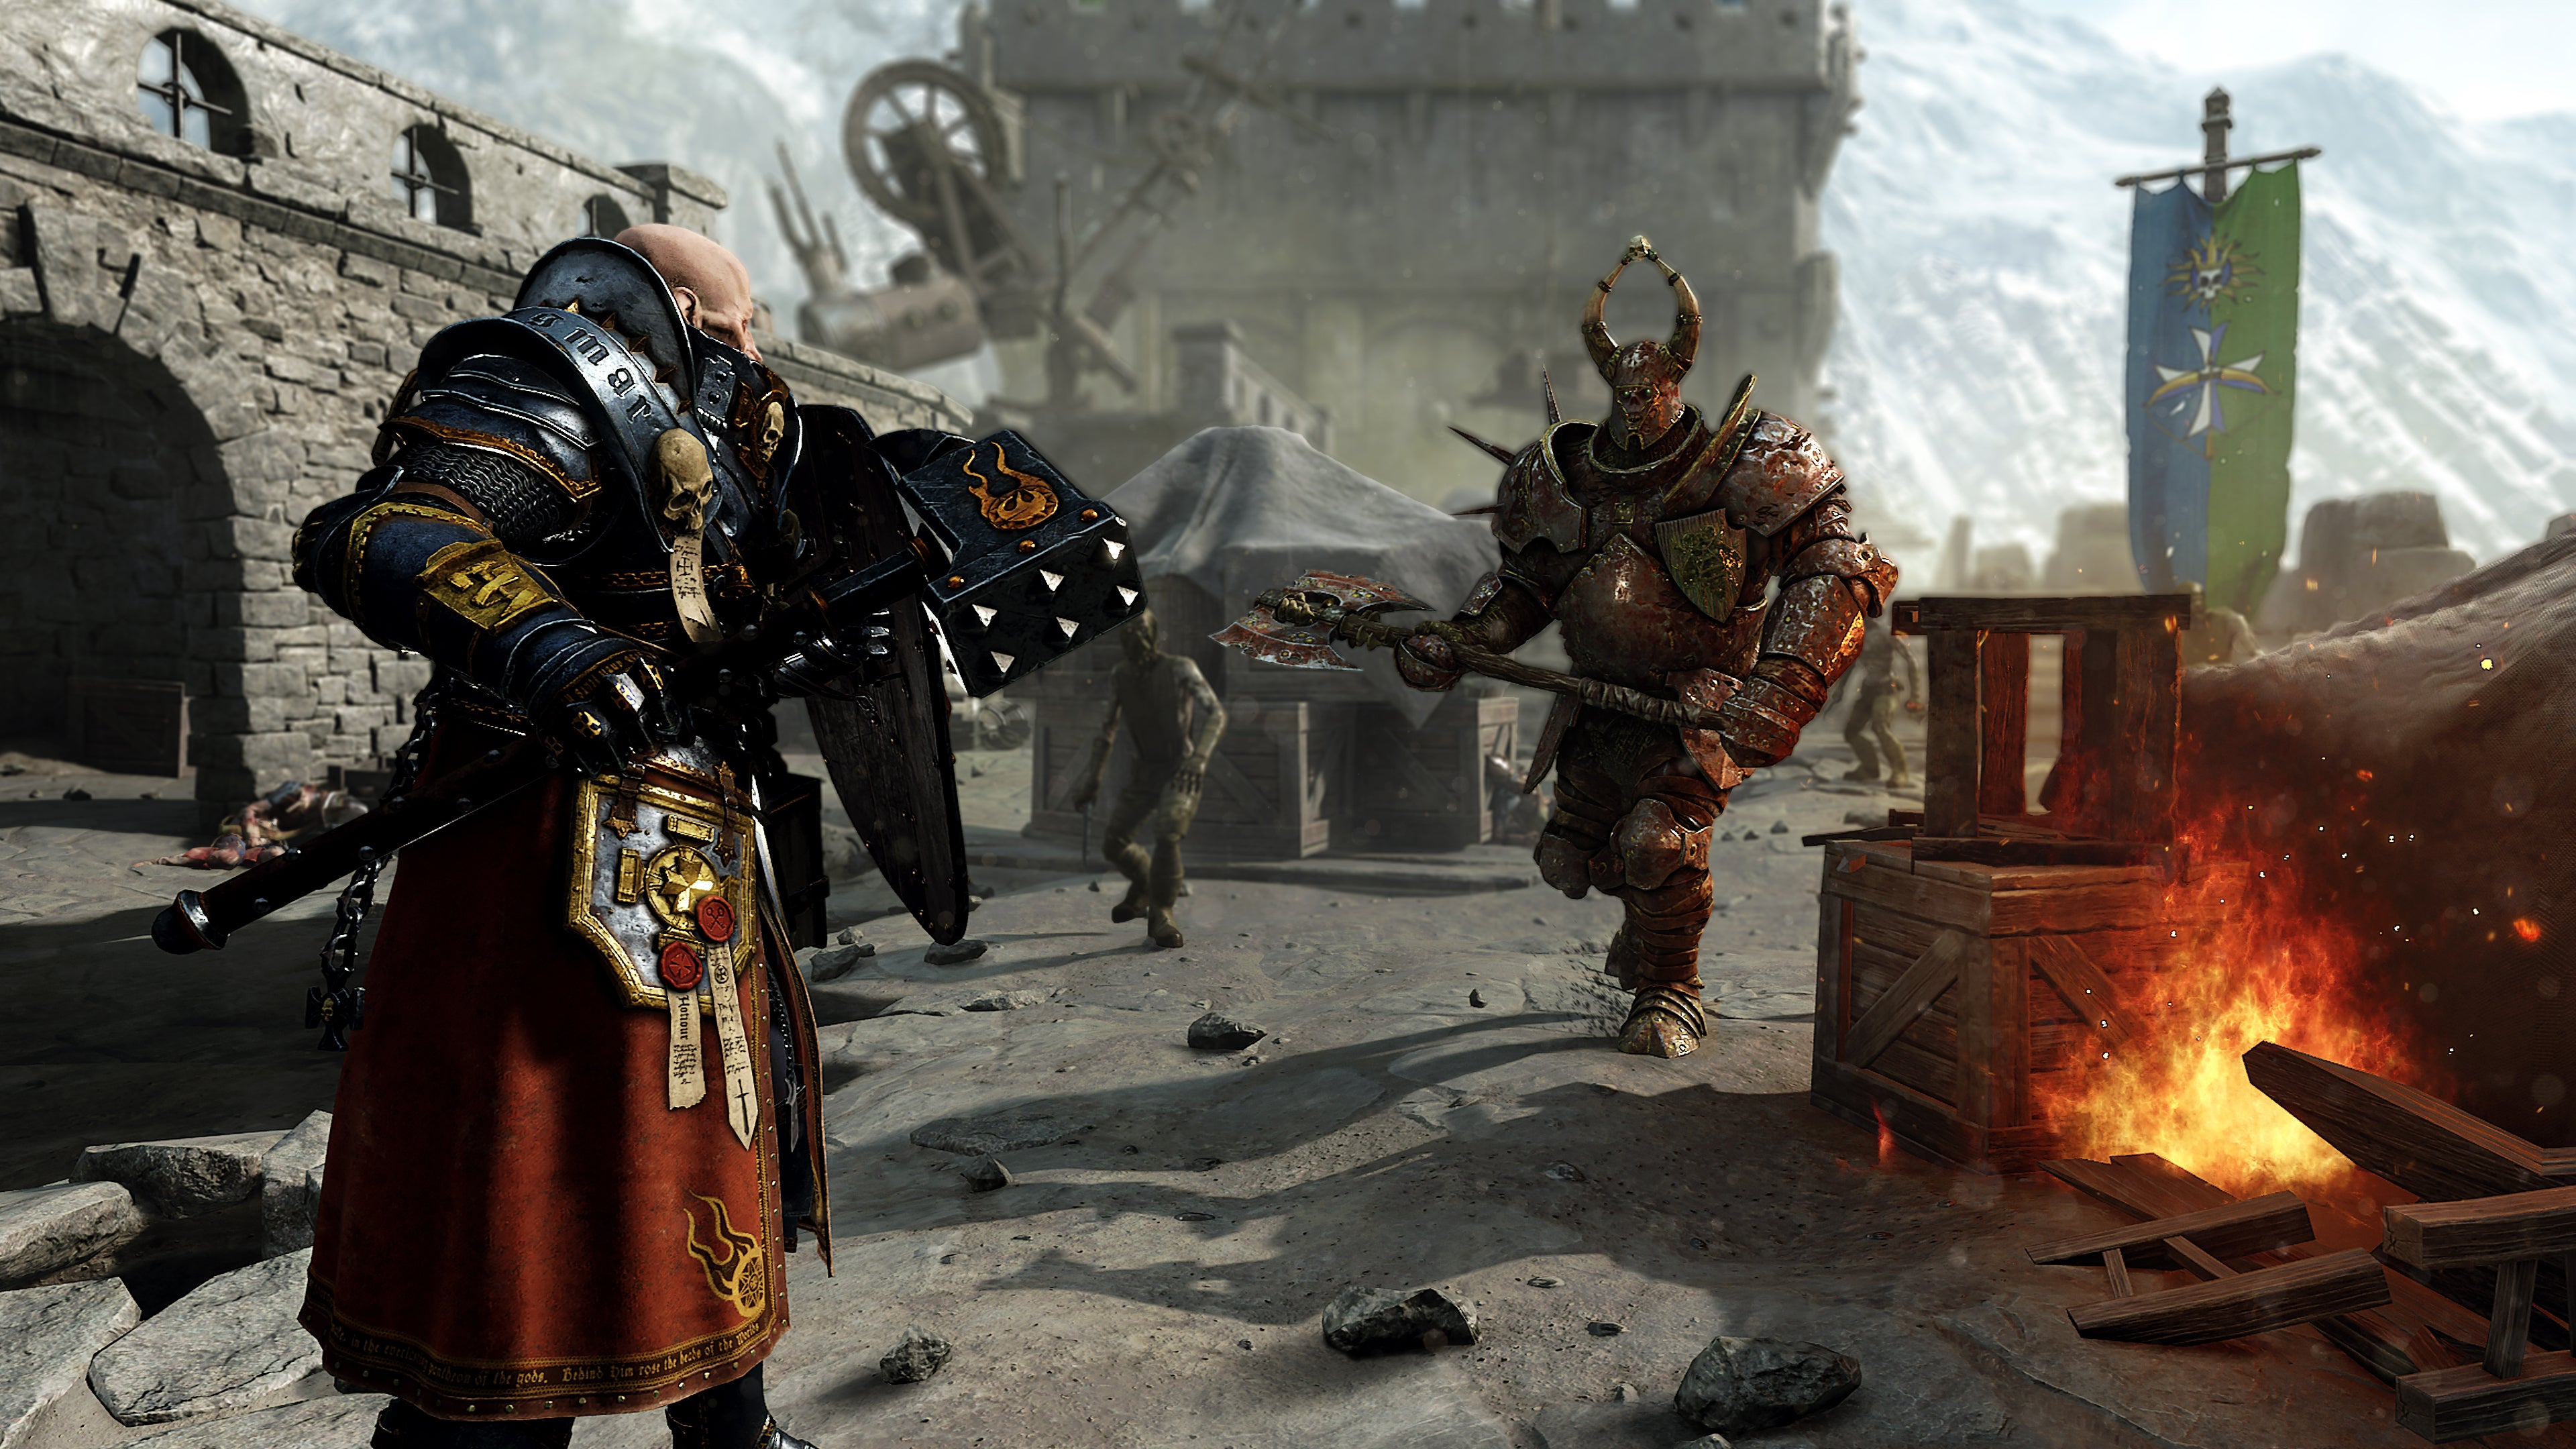 Vermintide 2's Saltzpyre faces a large armoured enemy wearing his snazzy new Warrior Priest outfit.